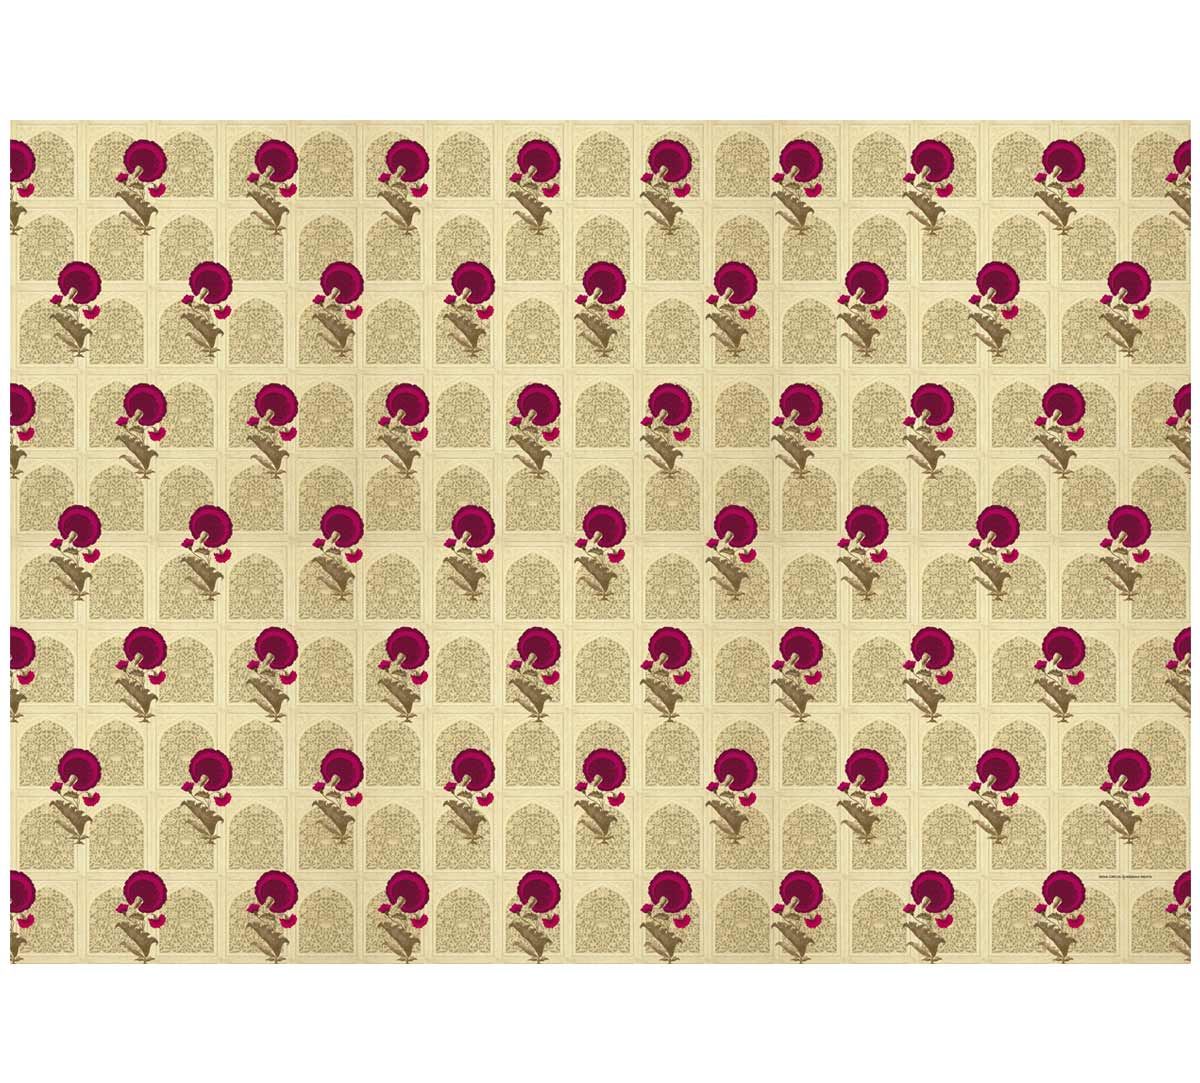 India Circus Flower Regalia Gift Wrapping Paper